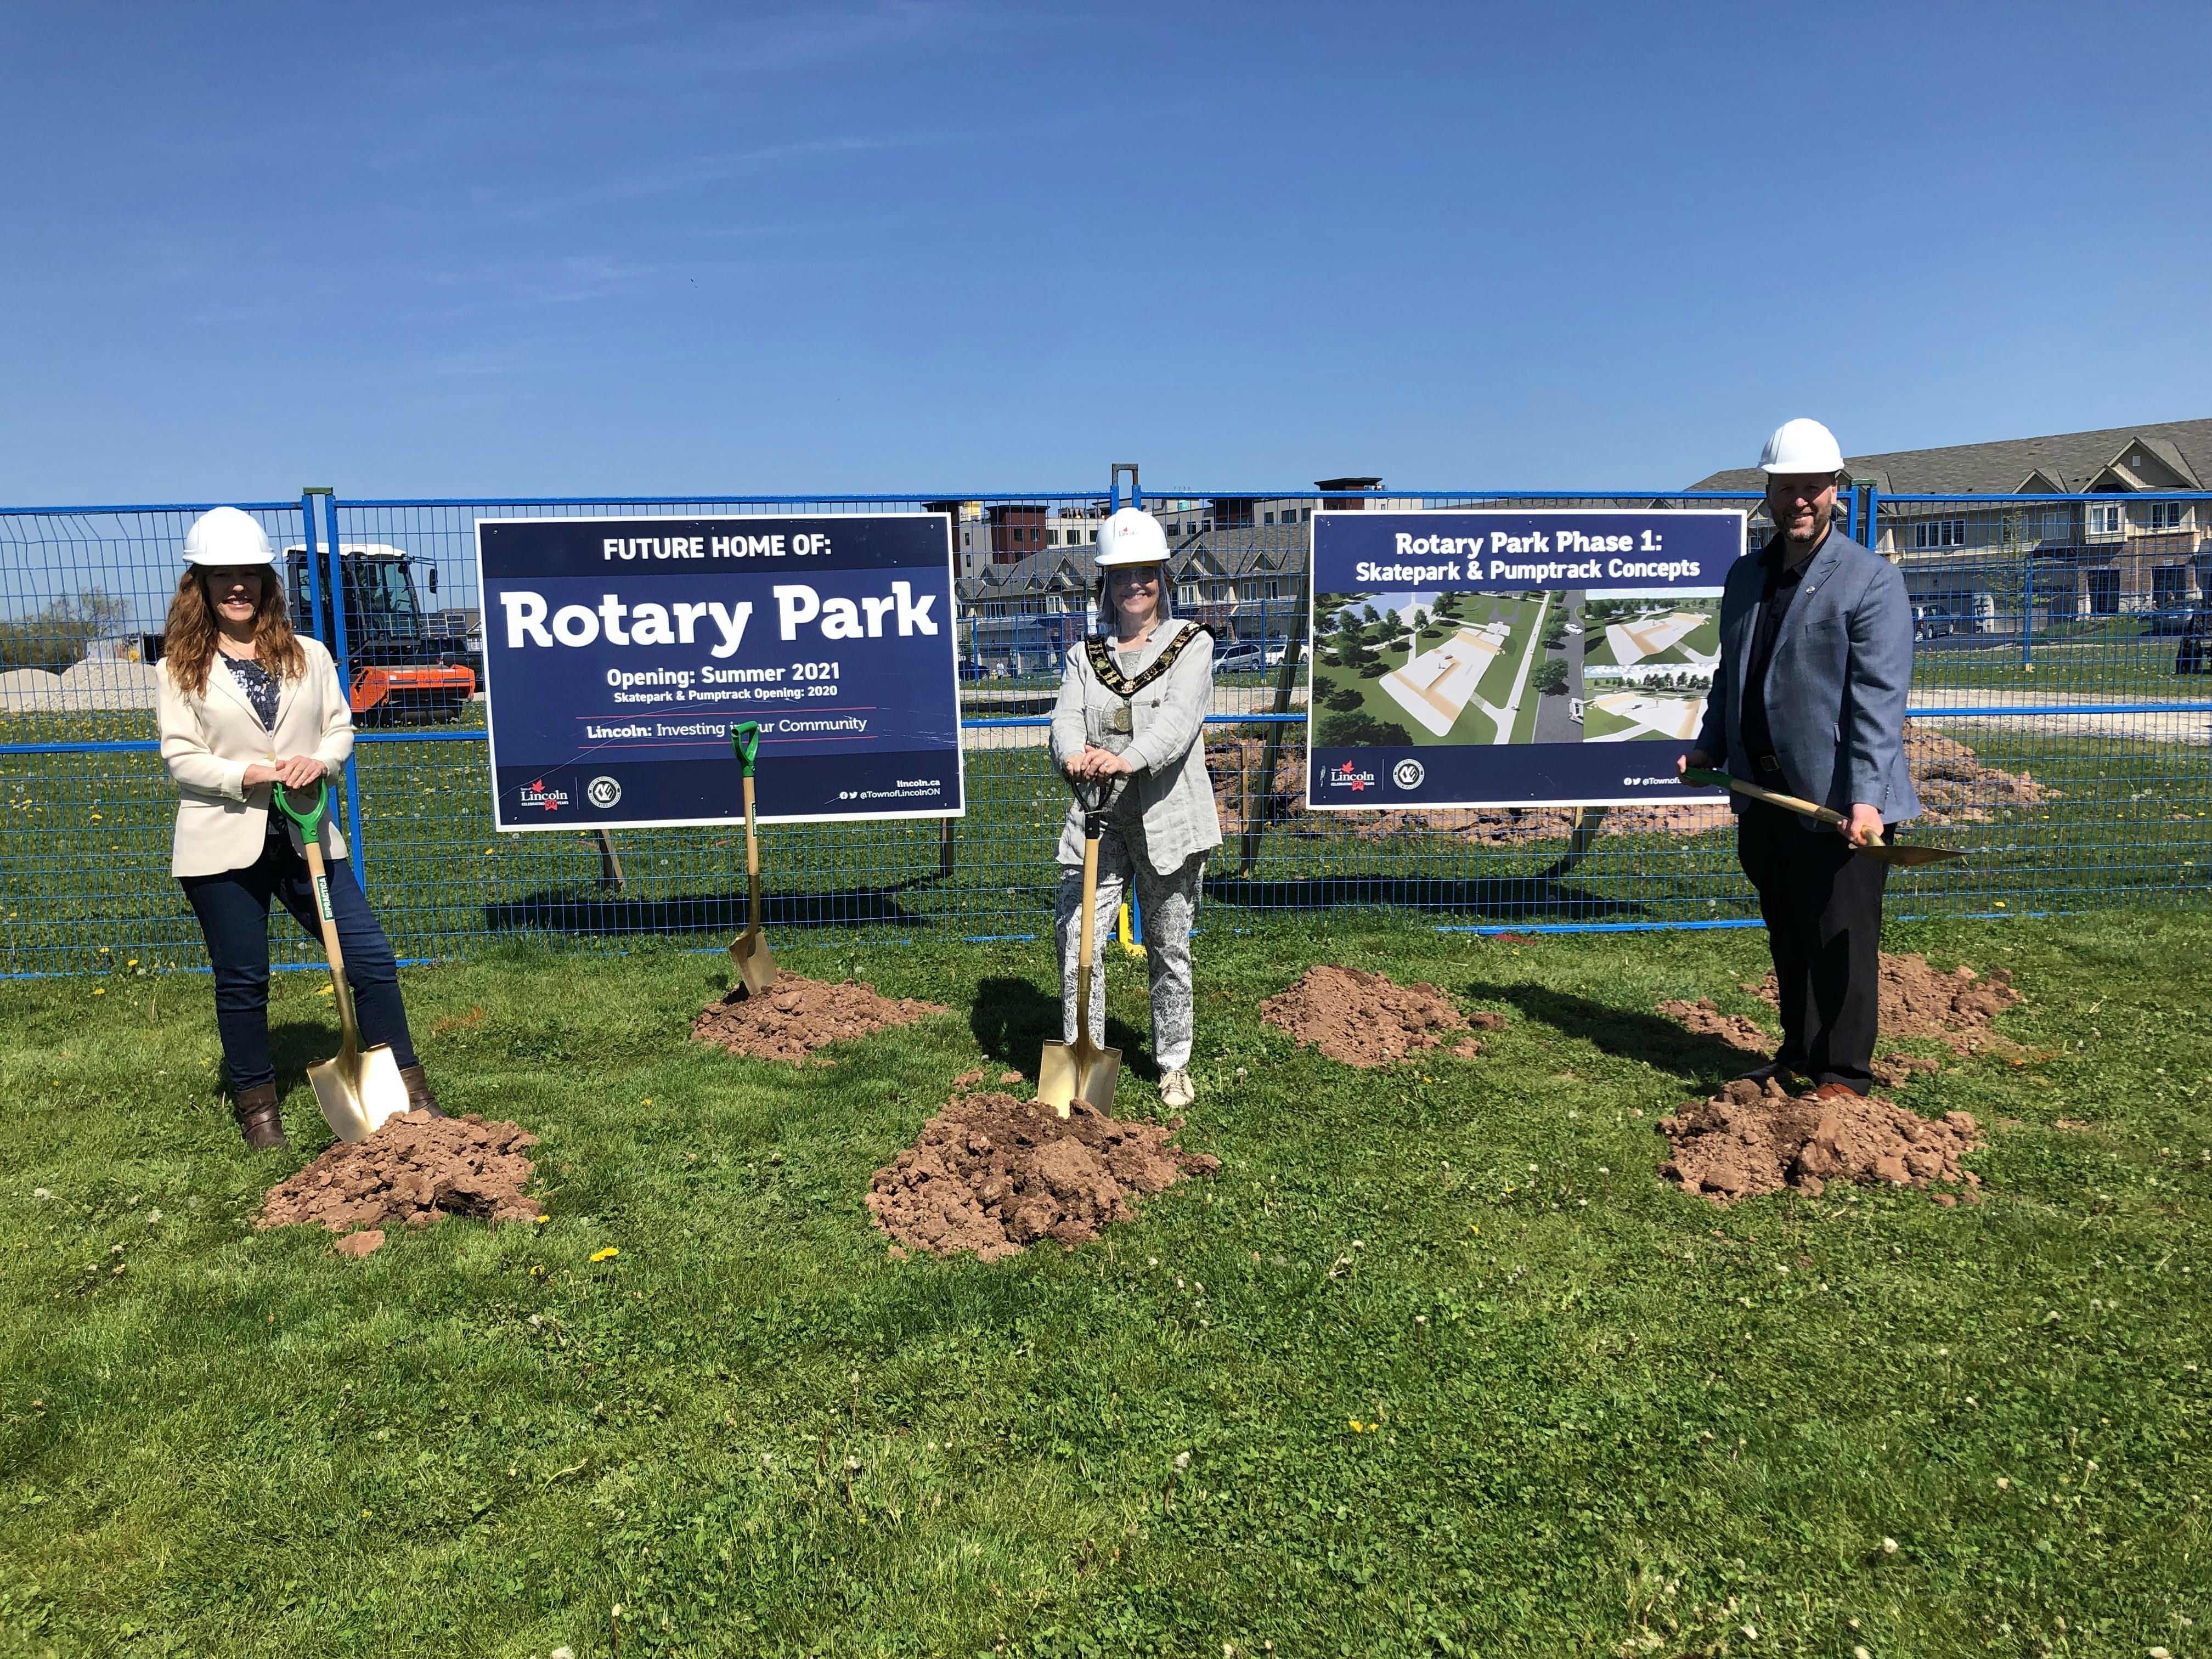 Mayor Easton and Councillors break ground for Rotary Park